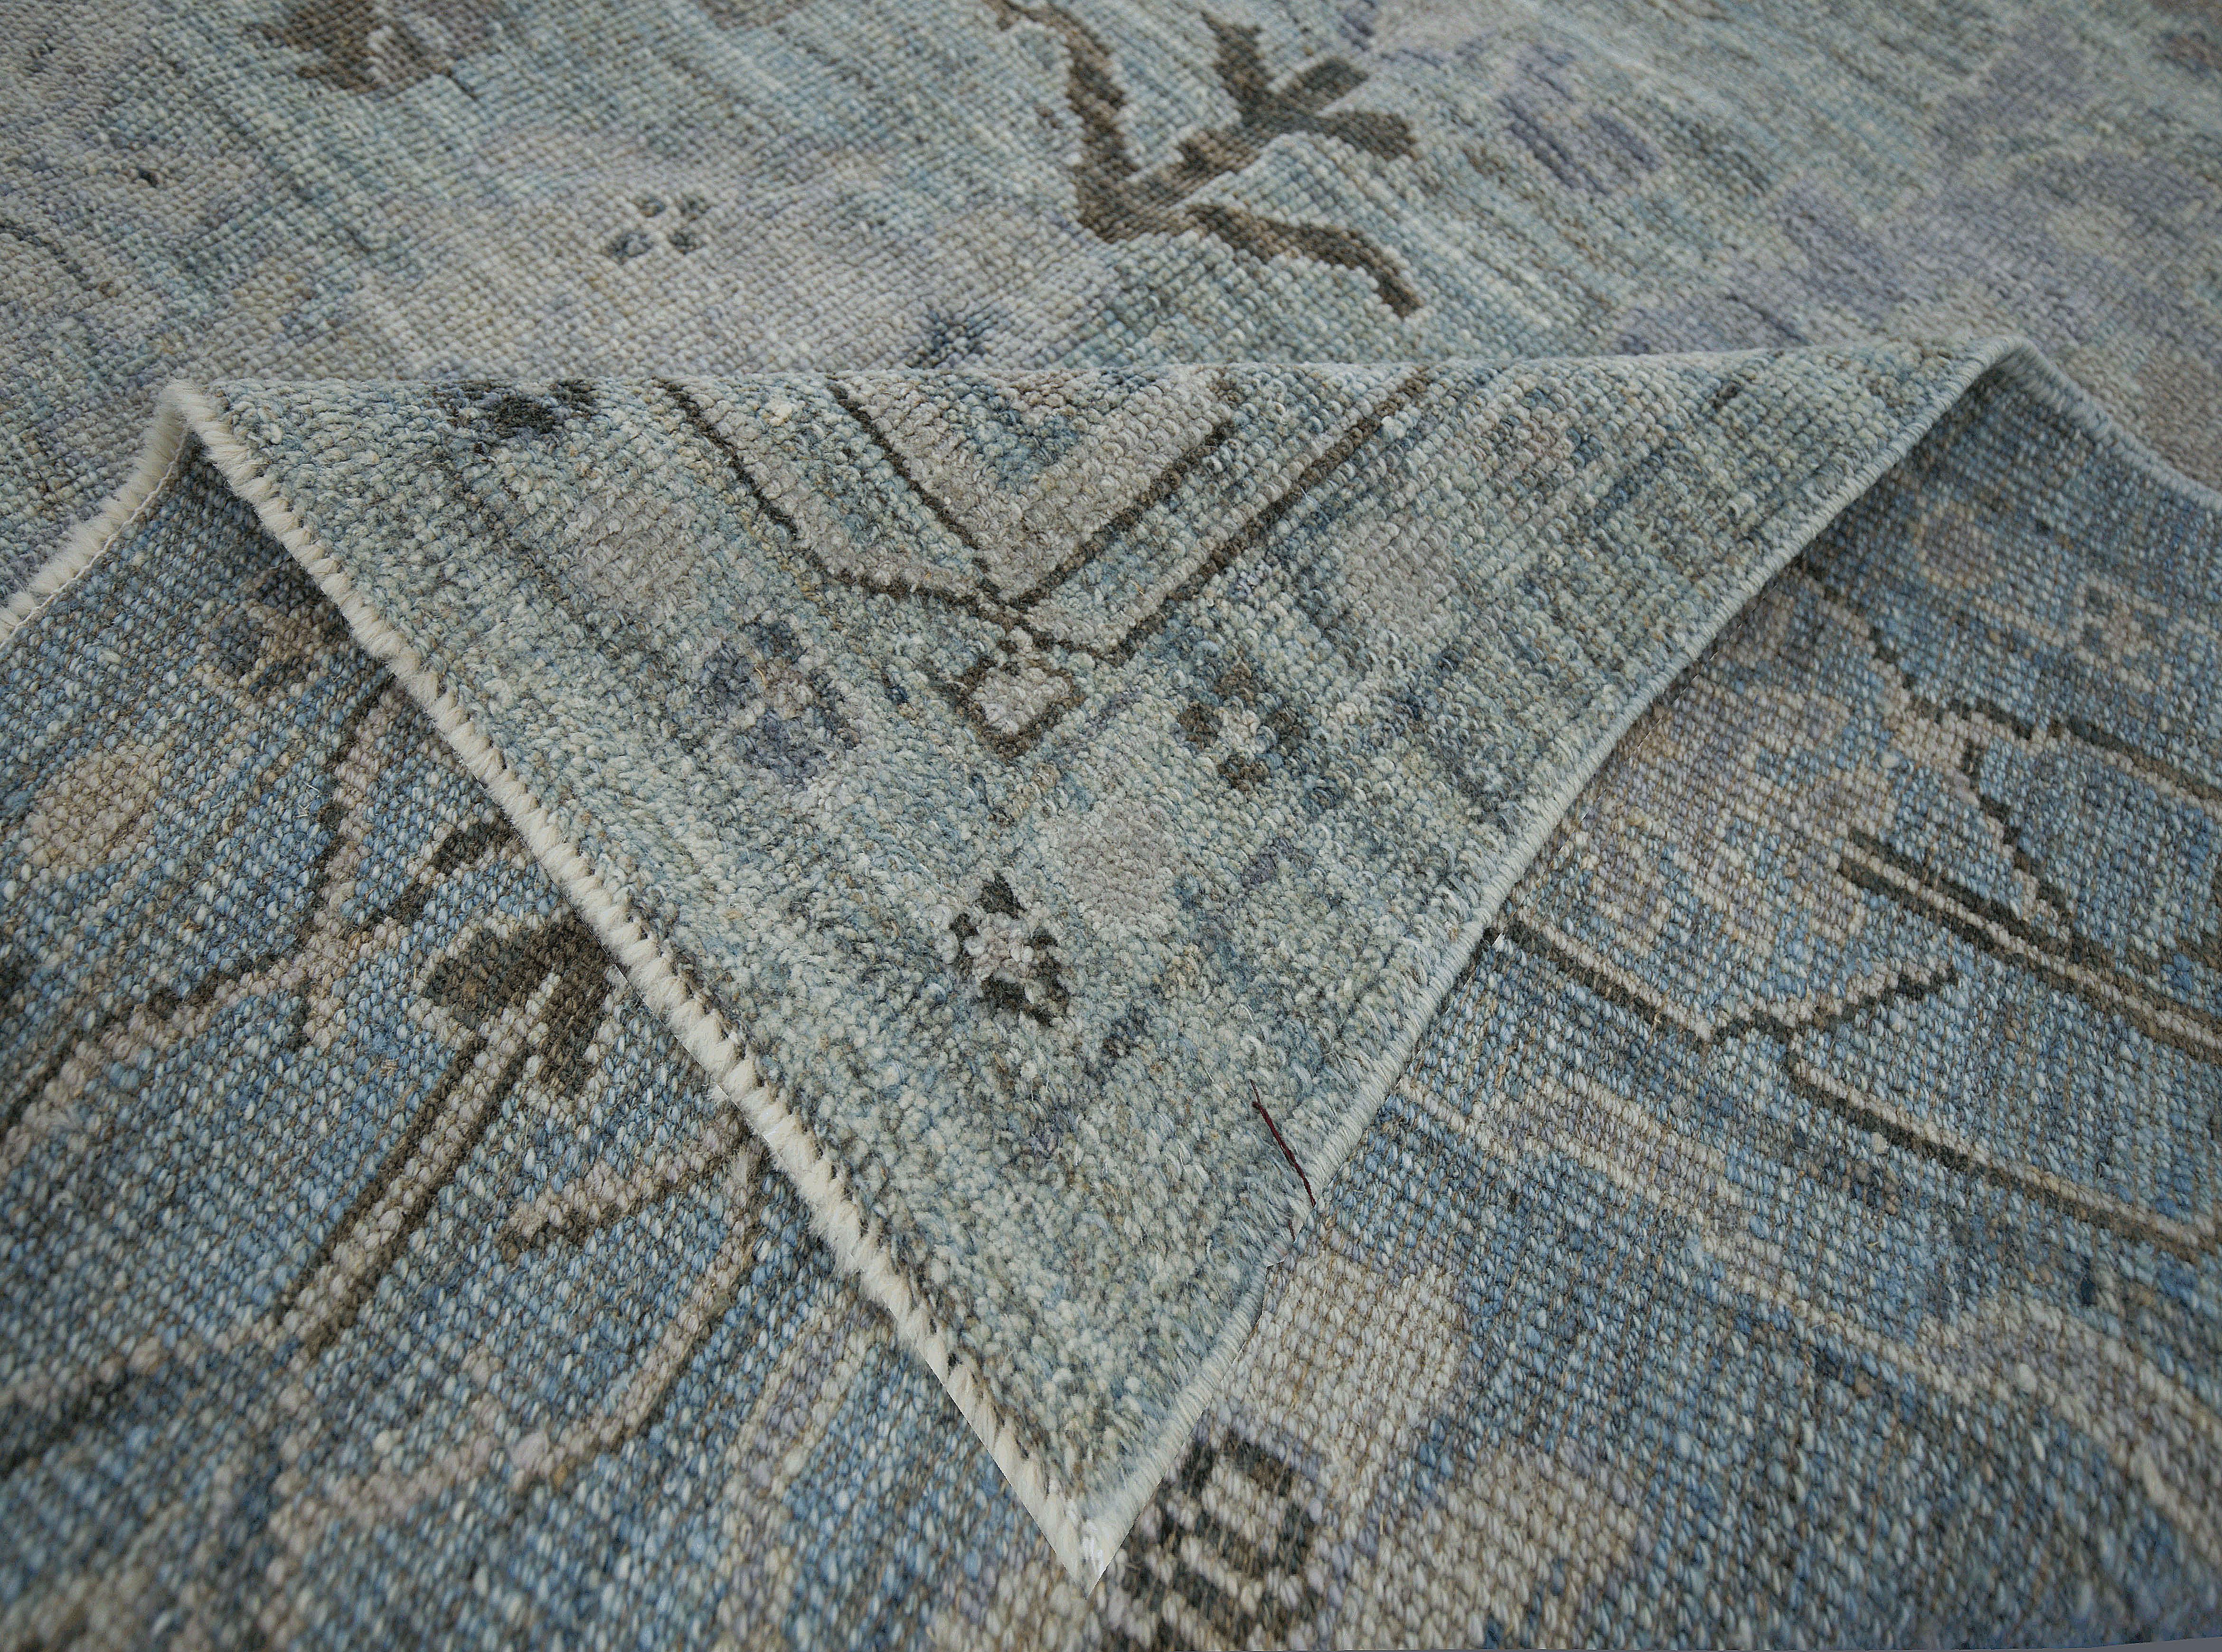  Contemporary Turkish rug made of handwoven sheep’s wool of the finest quality. It’s colored with organic vegetable dyes that are certified safe for humans and pets alike. It features a lovely bluish green field with floral medallion details in